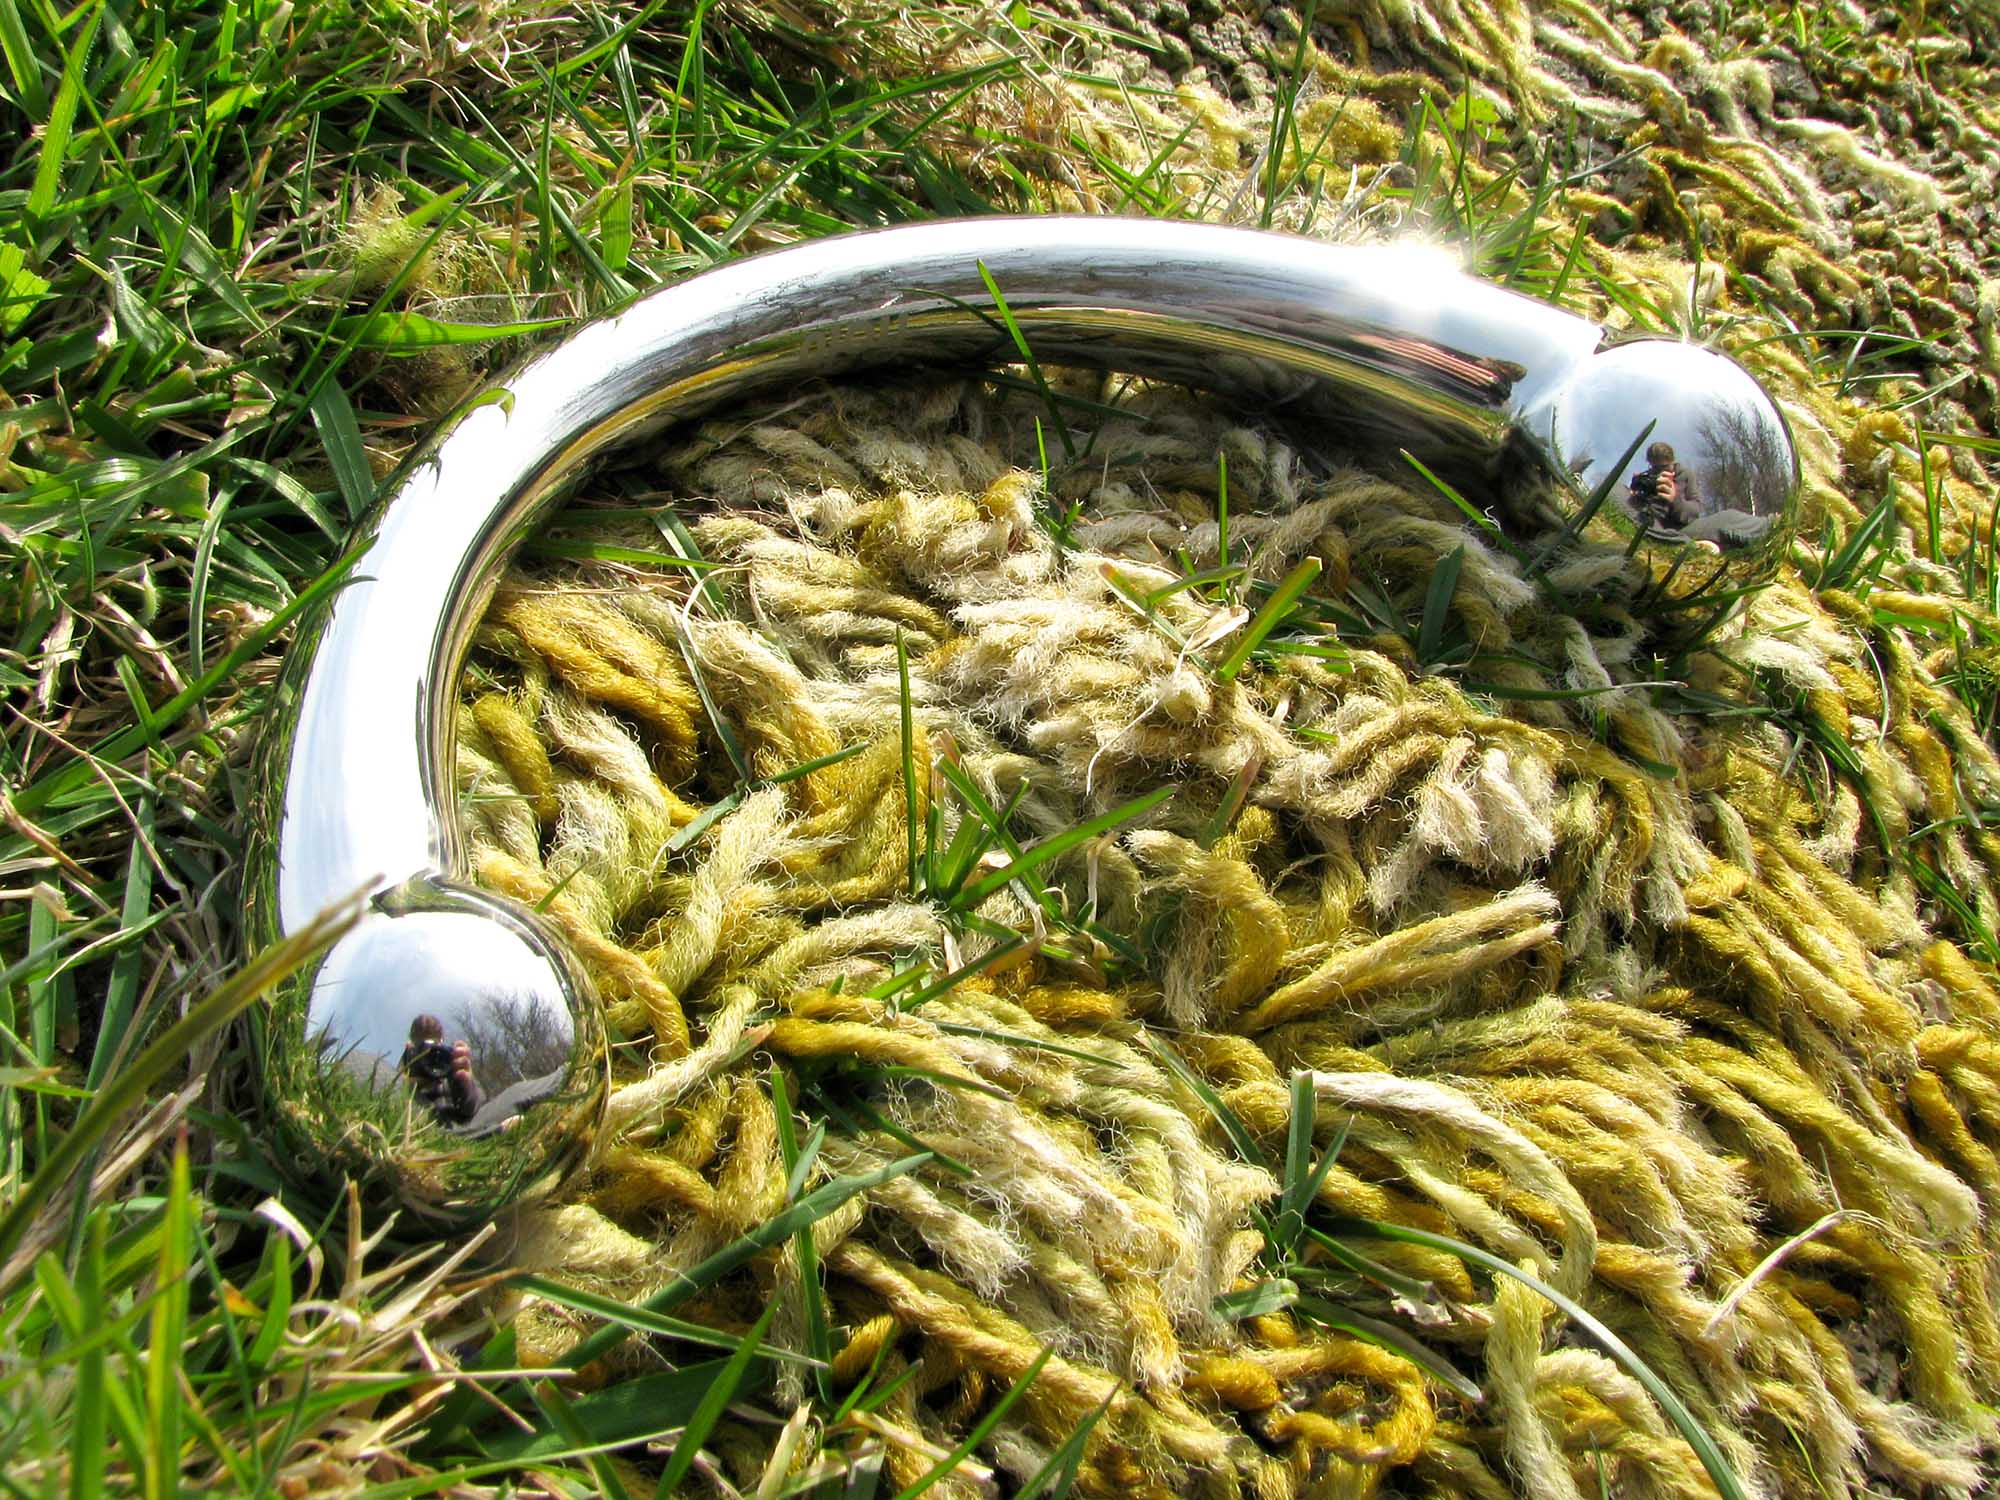 njoy Pure Wand stainless steel G-spot dildo on the ground, with golden shag carpet growing through the grass.